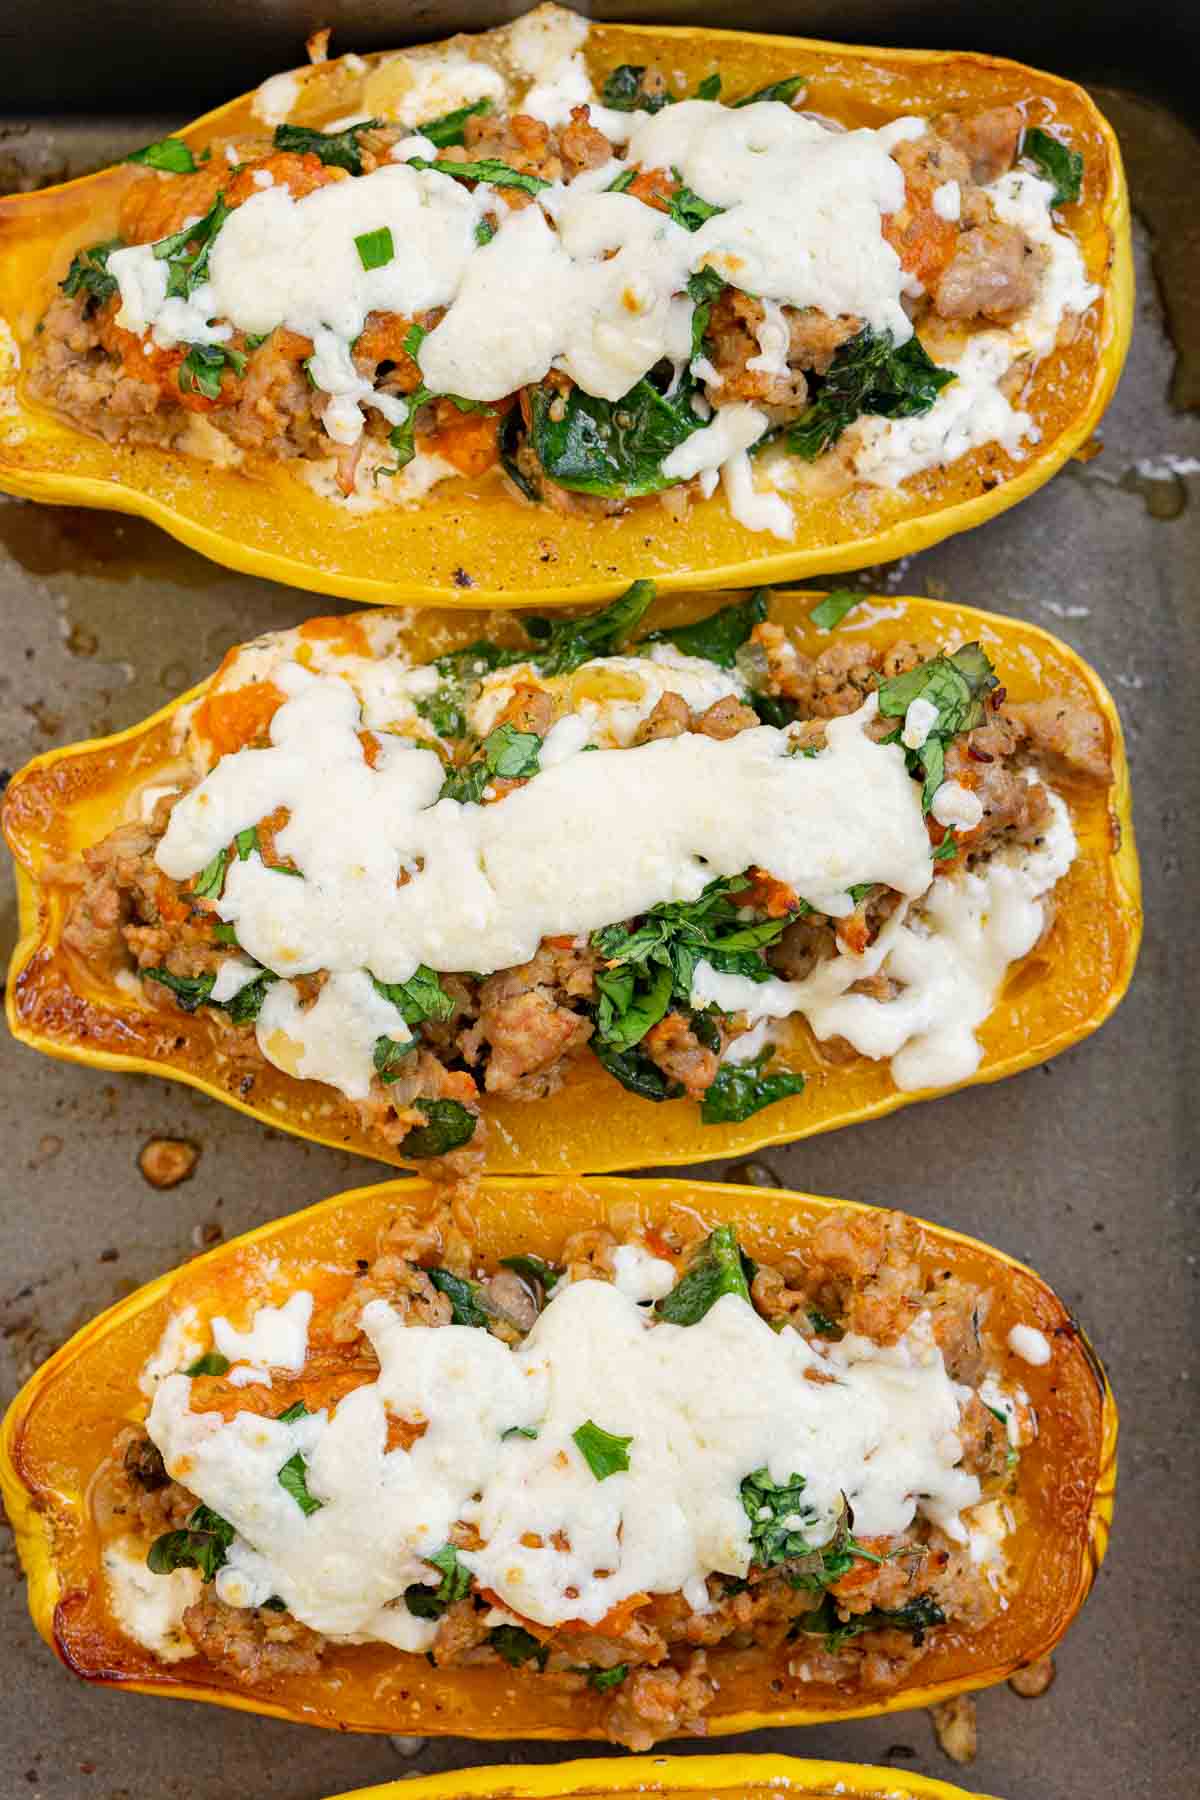 Baked stuffed delicata squash in a baking pan